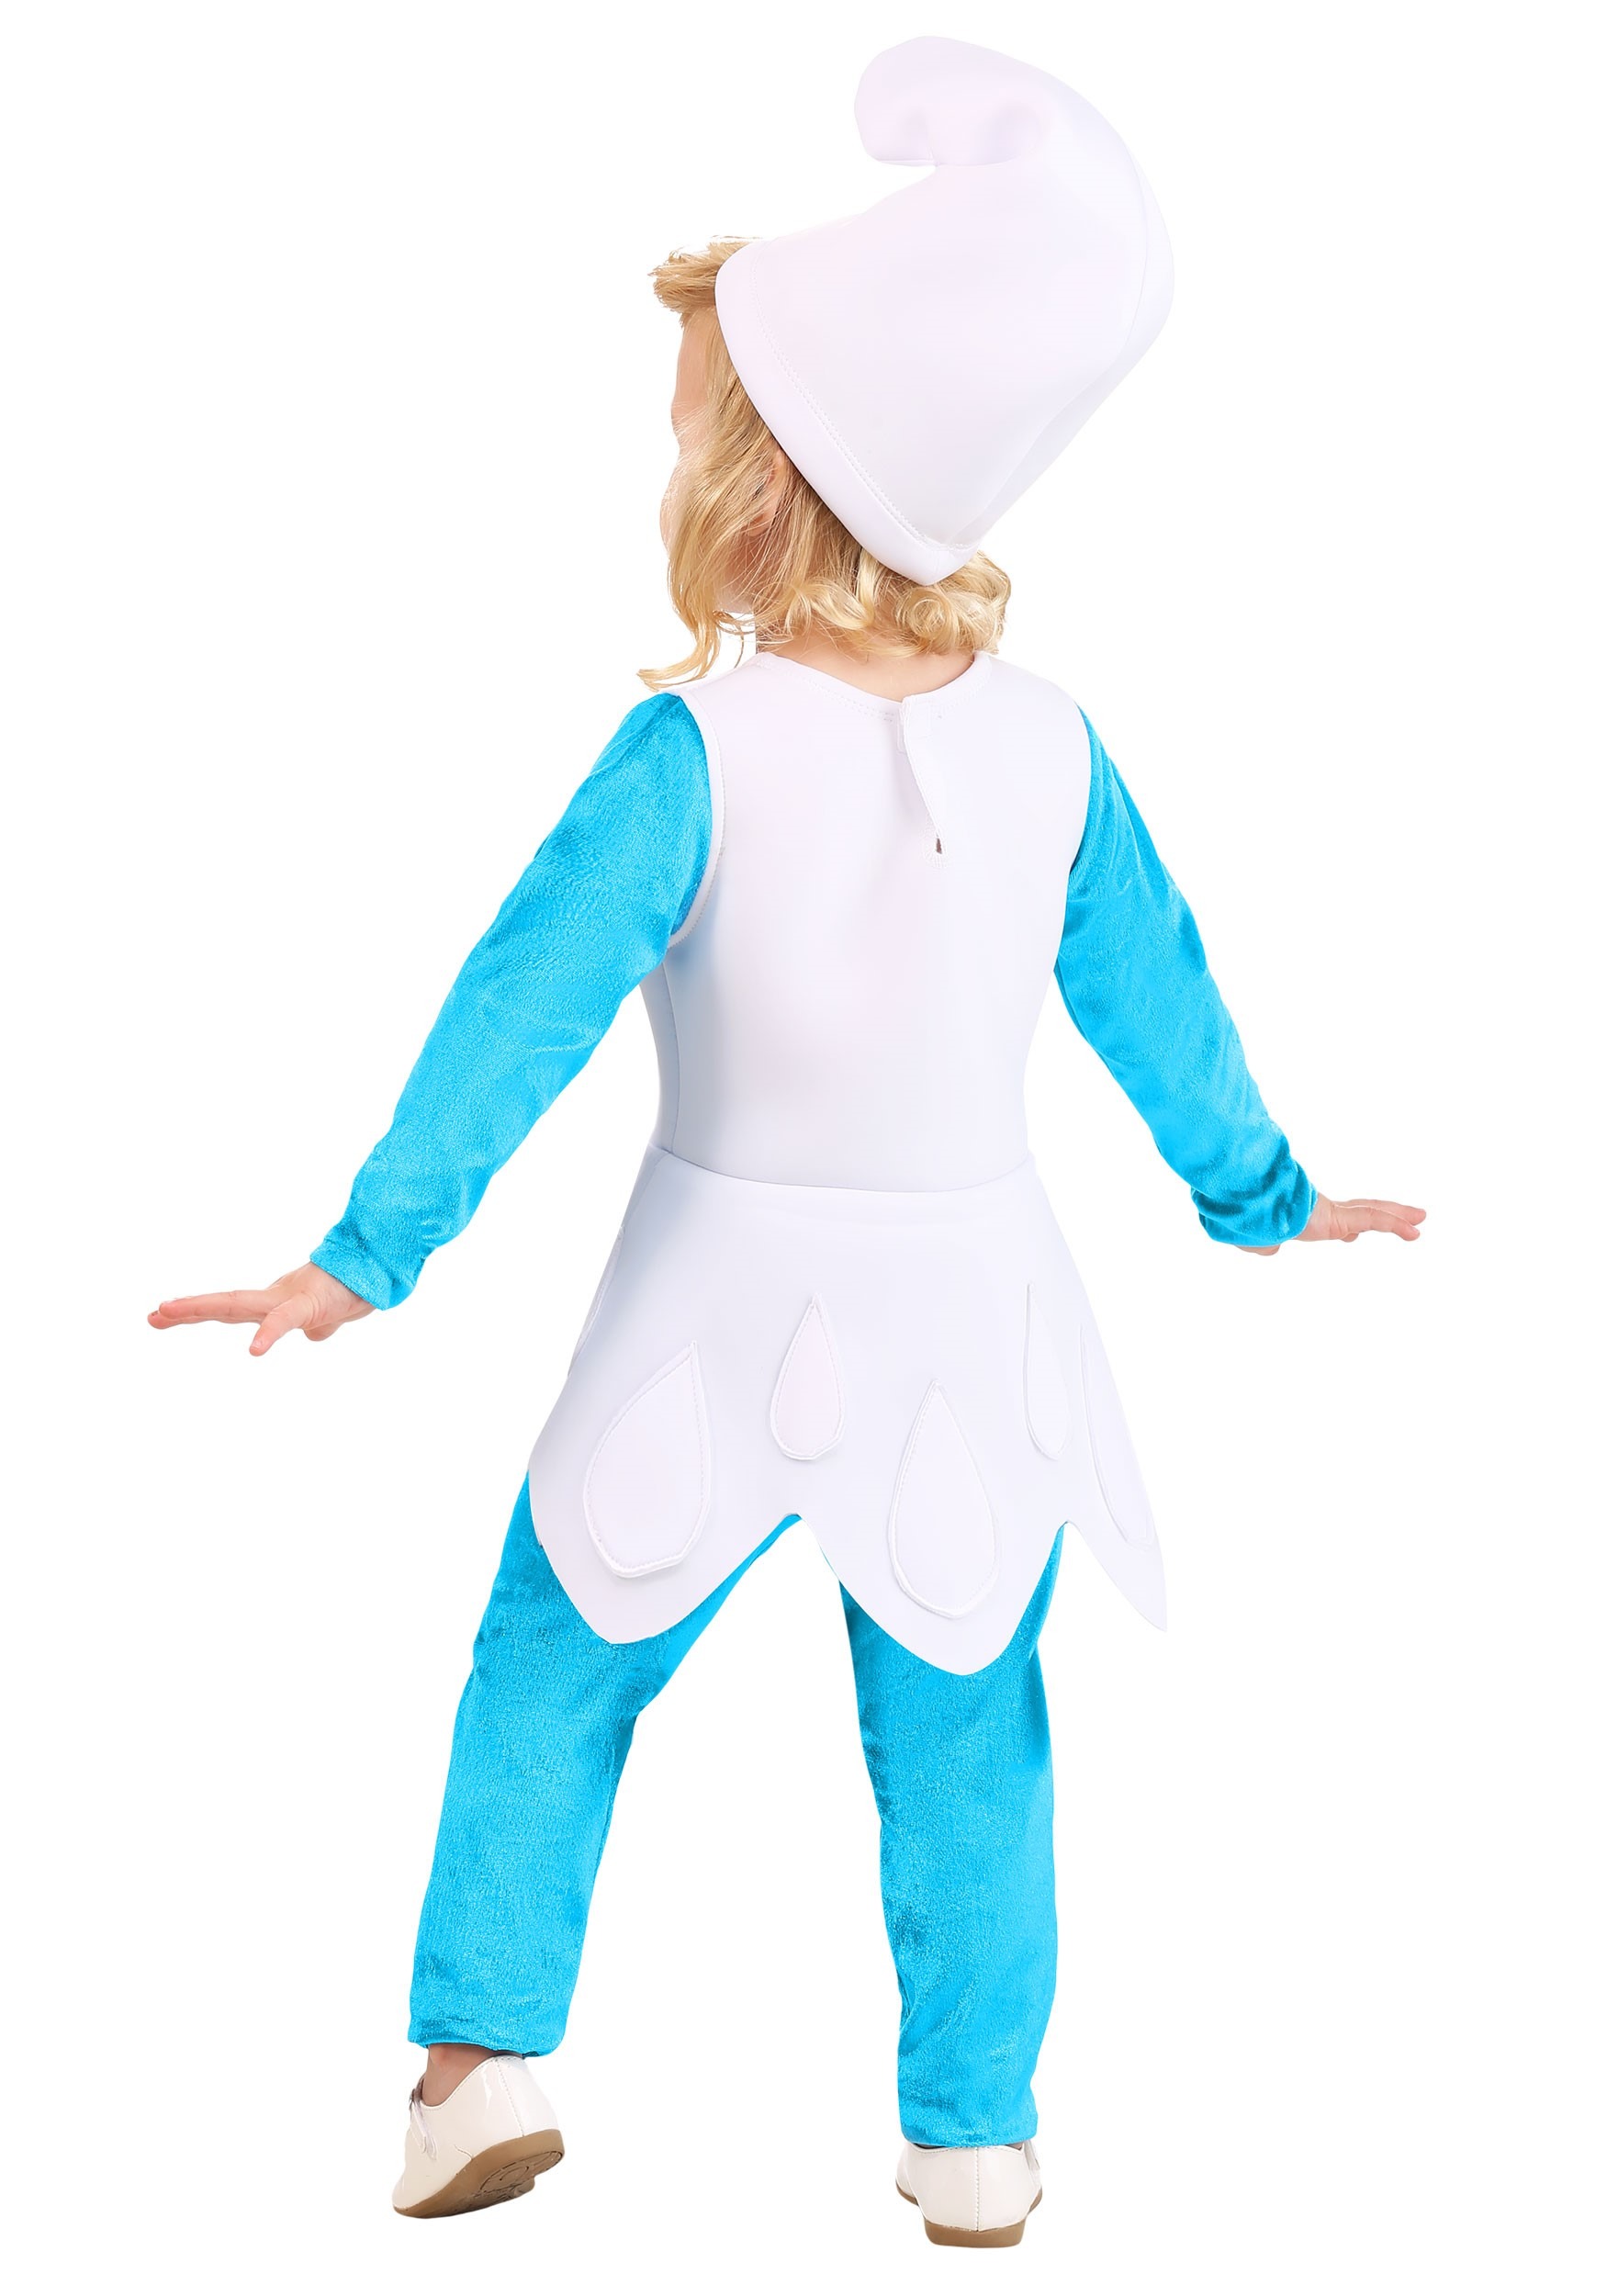 Details about   Smurf The Smurfs Cartoon Character Child Costume medium or Large